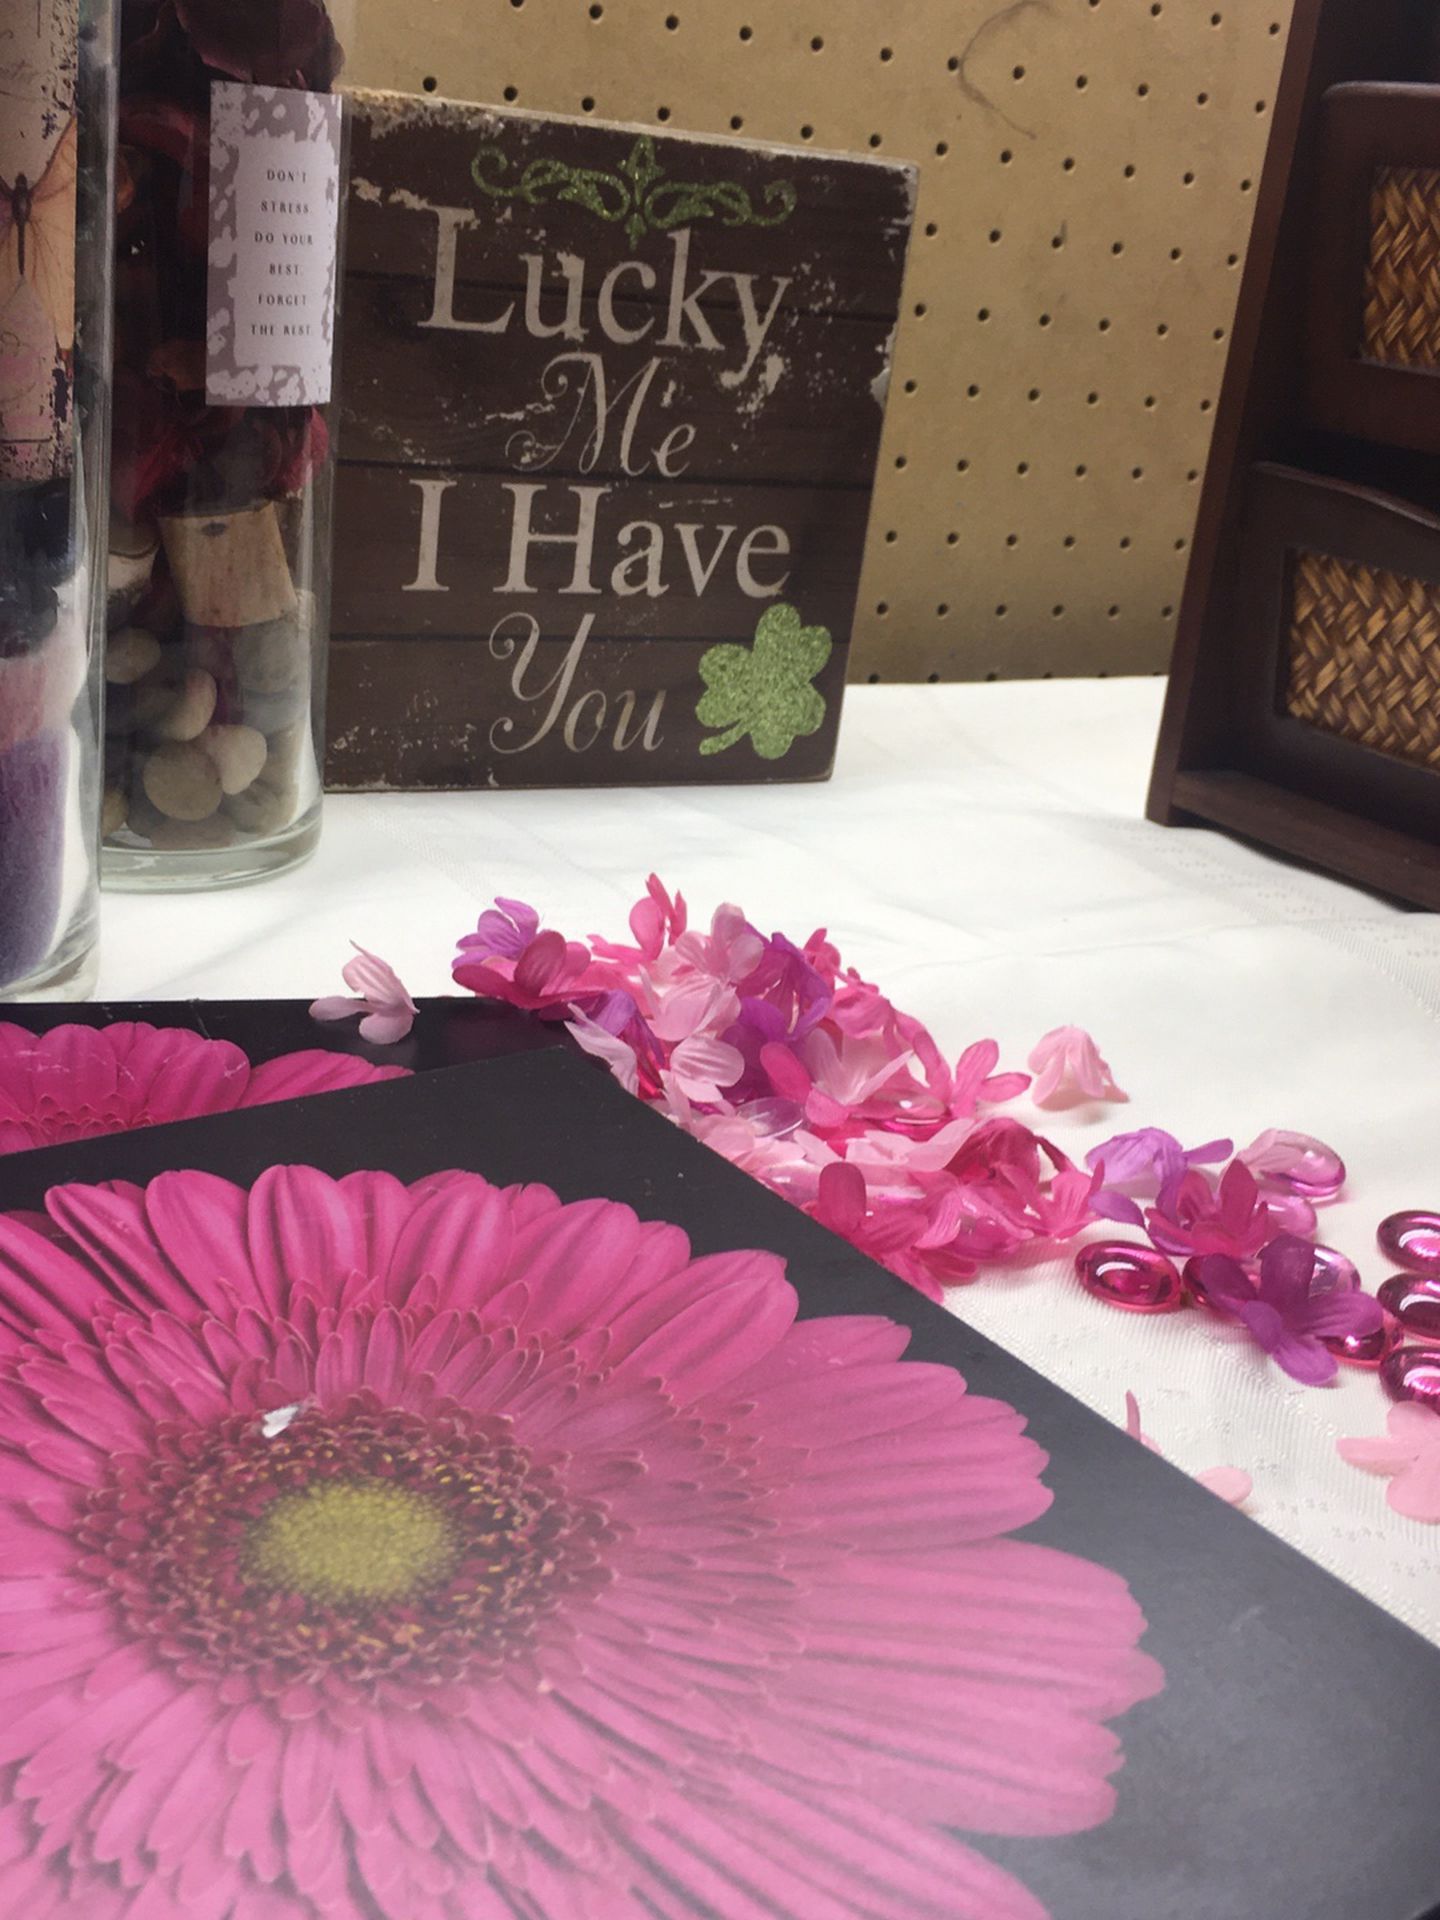 Decorative Unique ,One Of A Kind Vases ,And 4 Picture Flowers And Lucky Me I Have You Sign #valentinesday #love